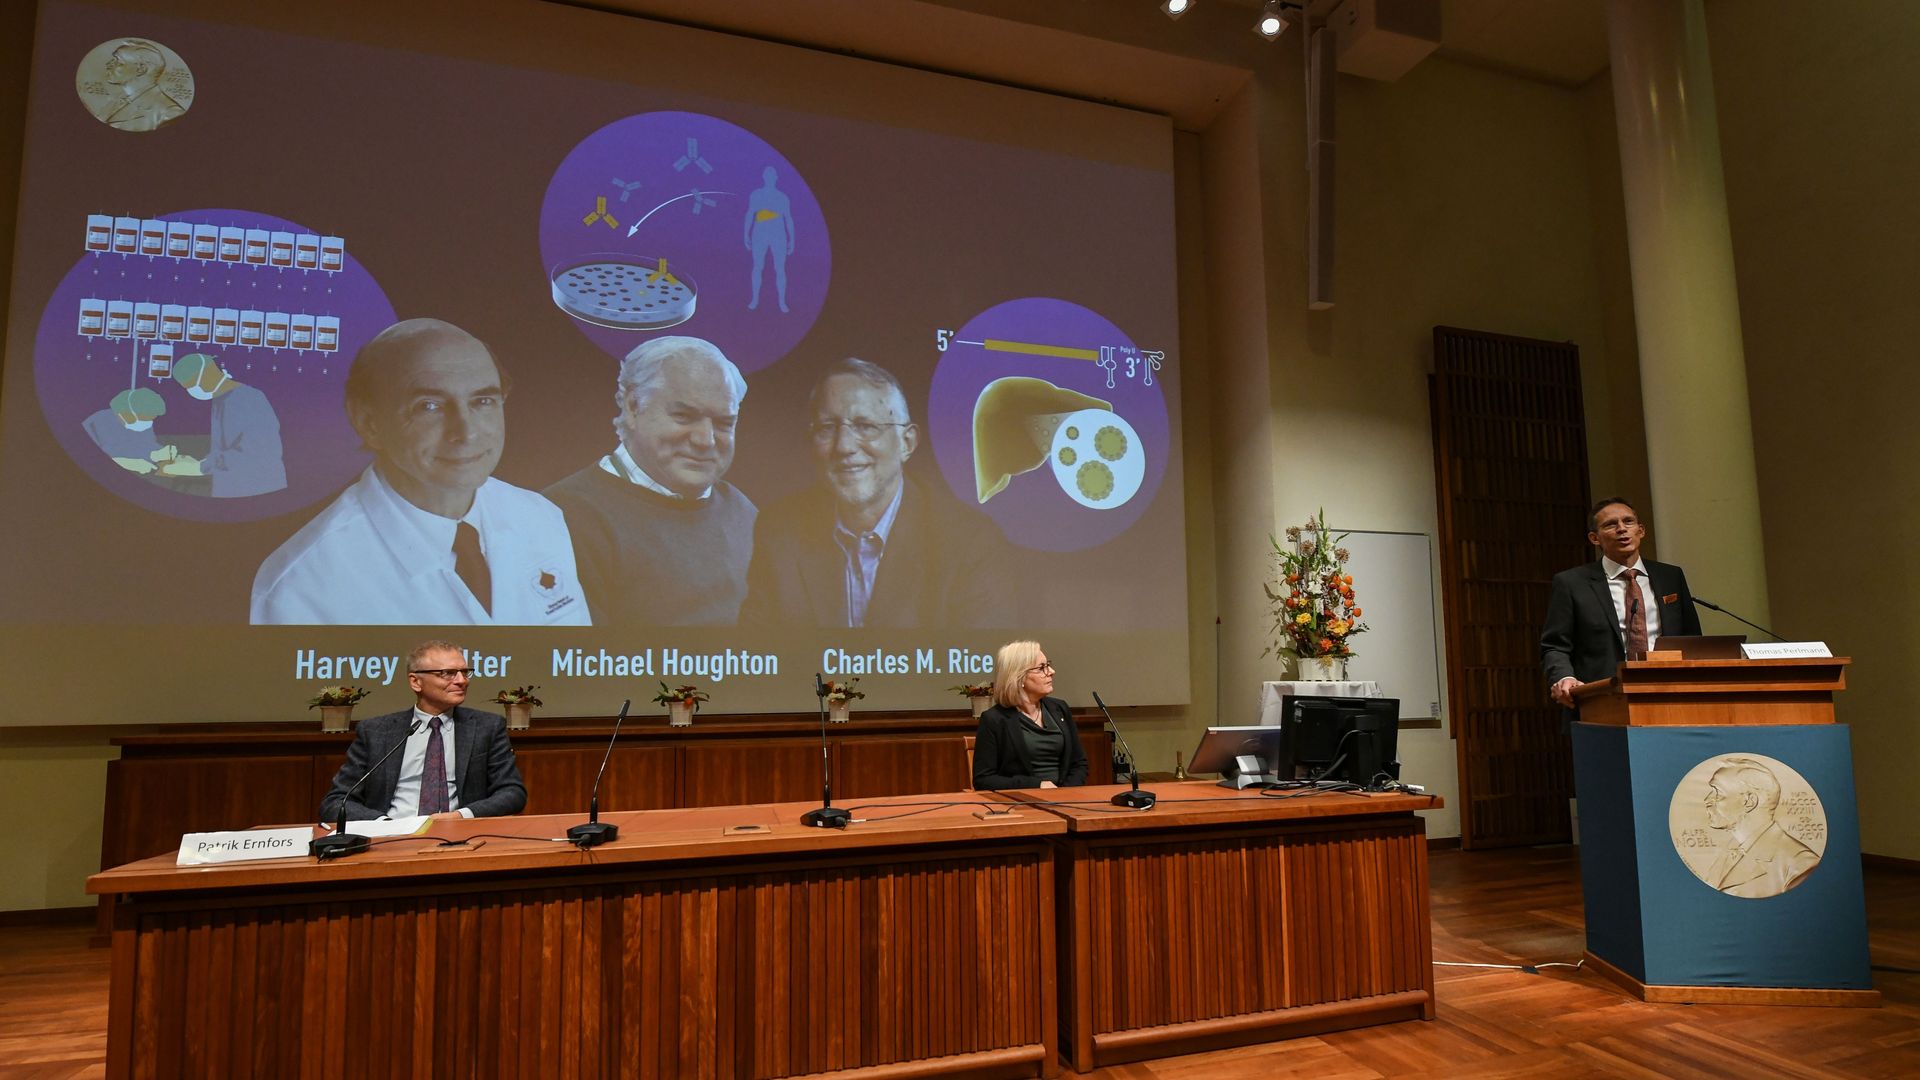  Americans Harvey Alter and Charles Rice as well as Briton Michael Houghton win the 2020 Nobel Medicine Prize for the discovery of Hepatitis C virus